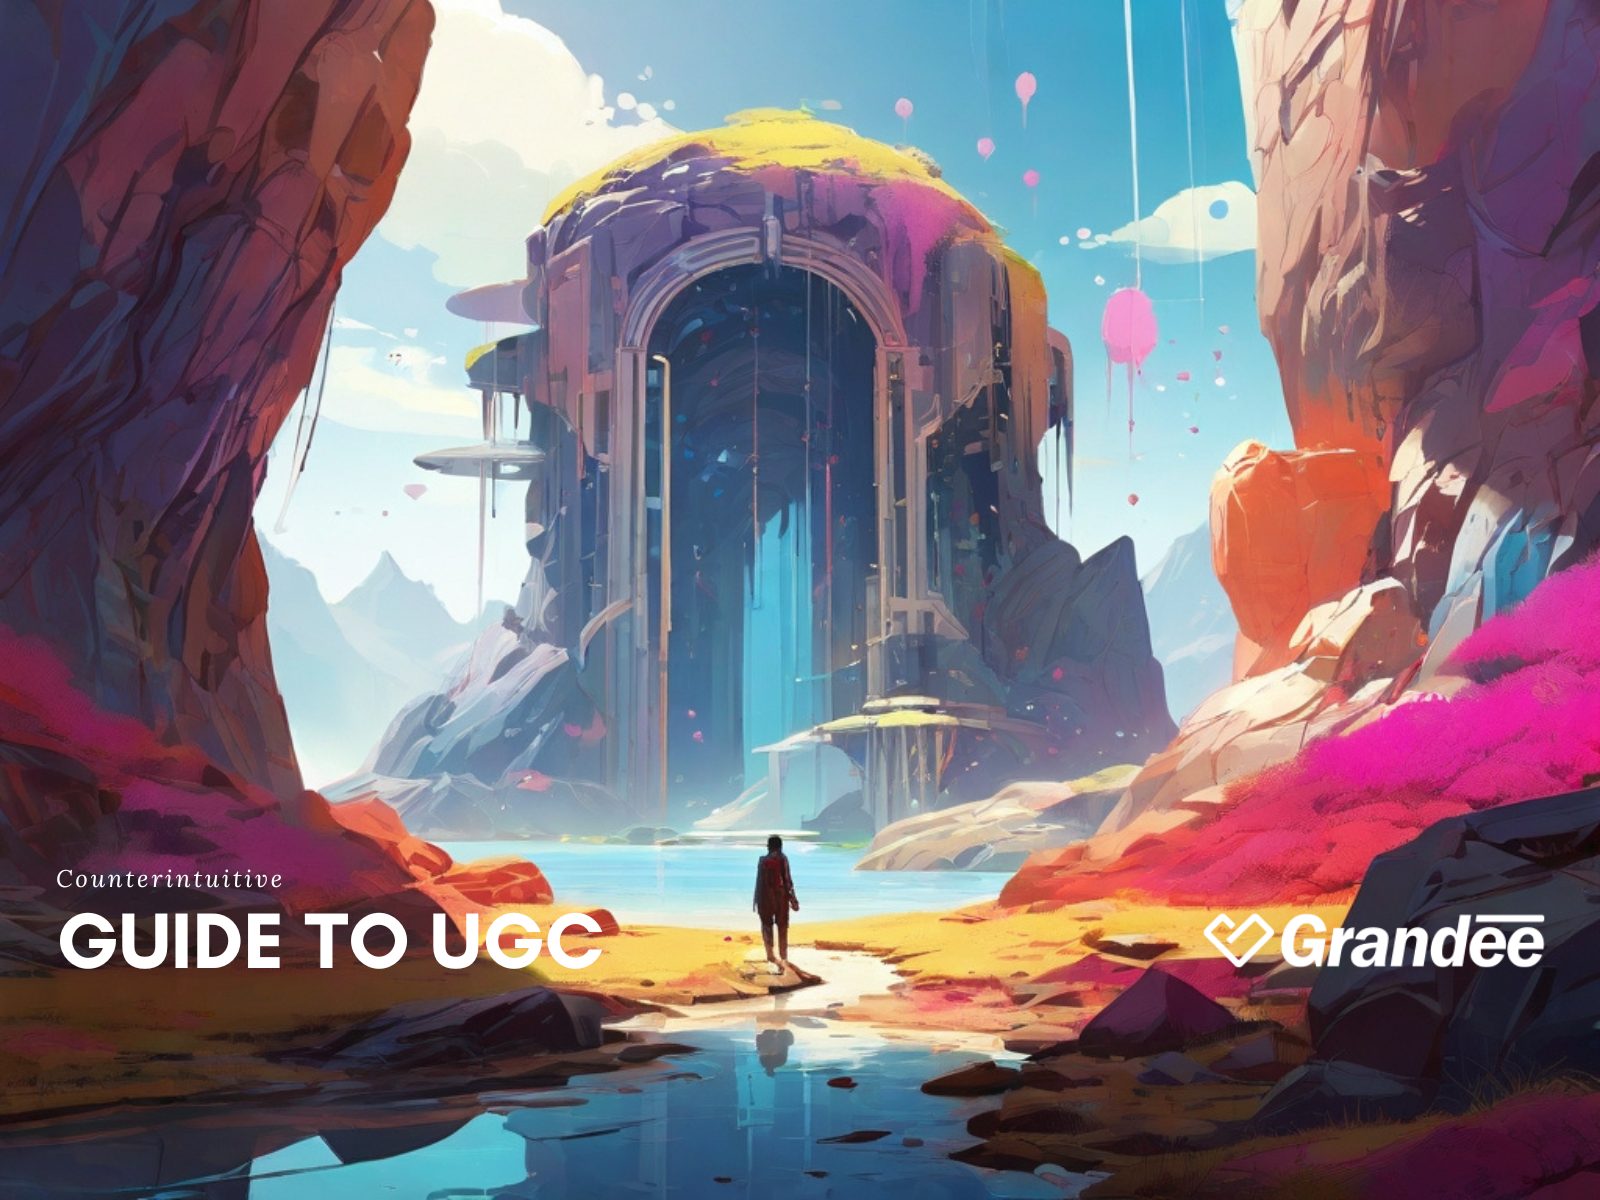 The Counterintuitive Guide to UGC